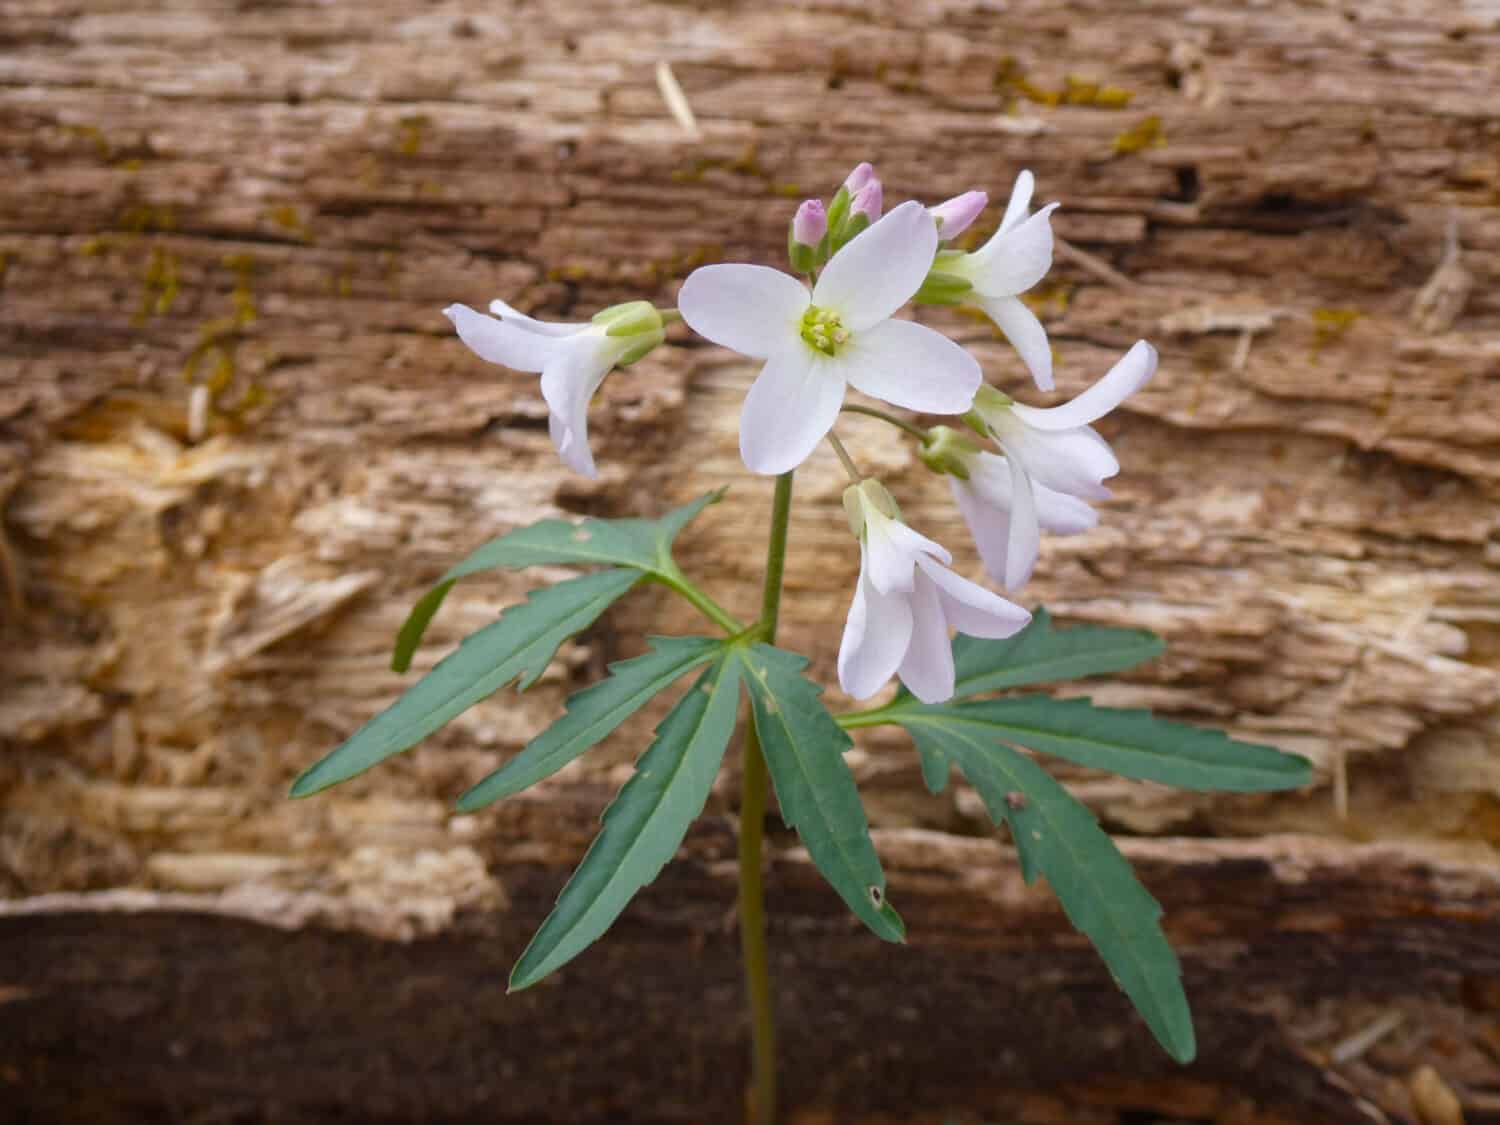 Closeup of a cutleaf toothwort (Cardamine concatenata) flower in spring with decaying wood in the background.